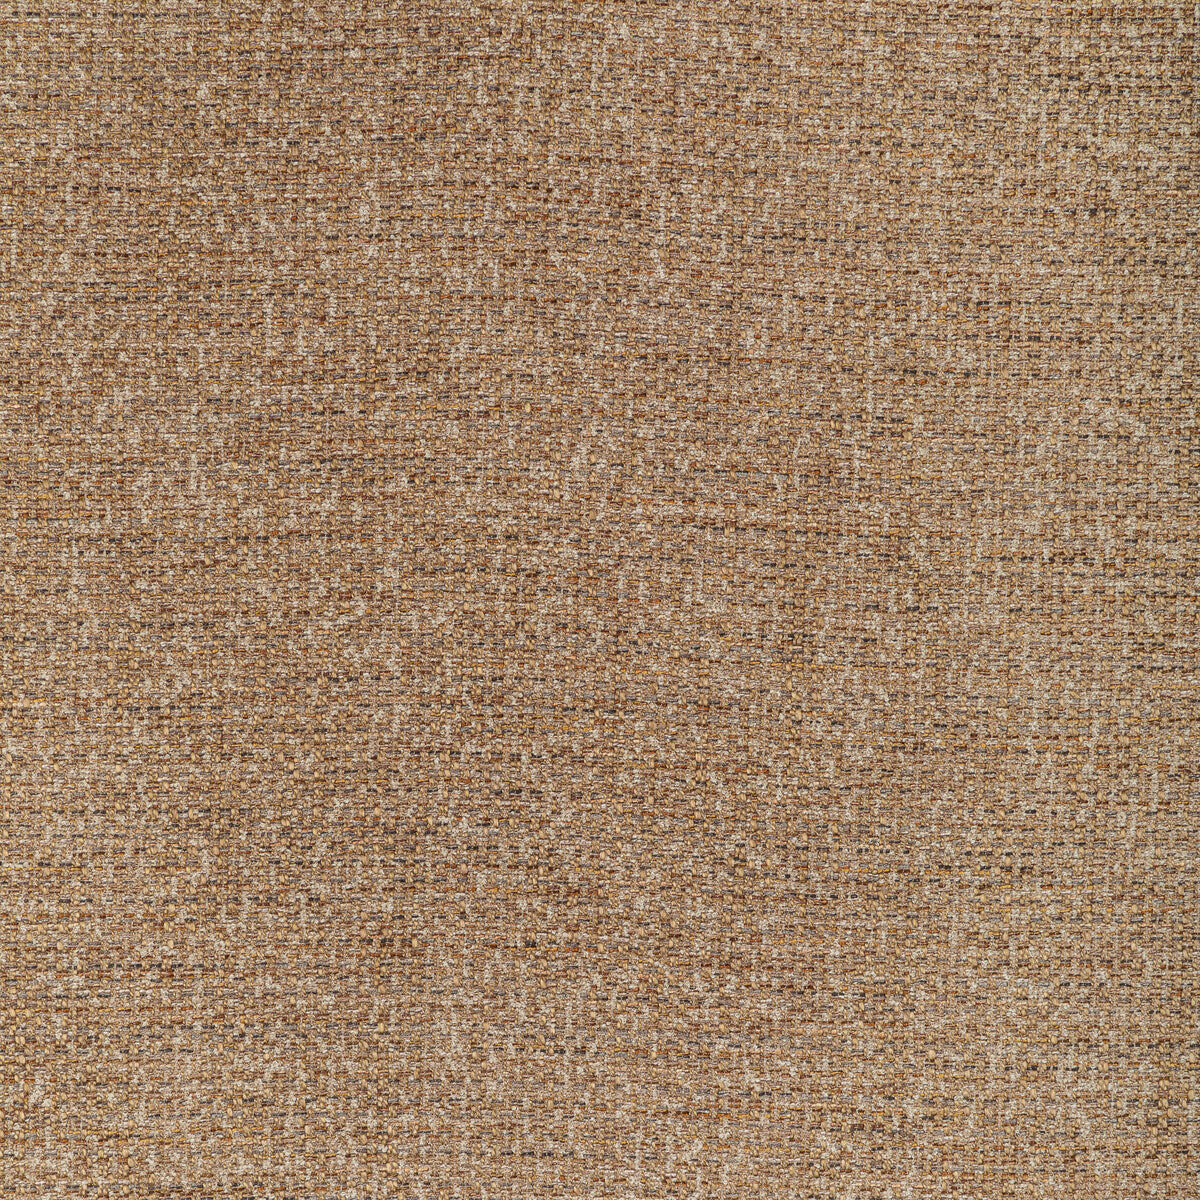 Dax fabric in amber color - pattern 36326.1161.0 - by Kravet Contract